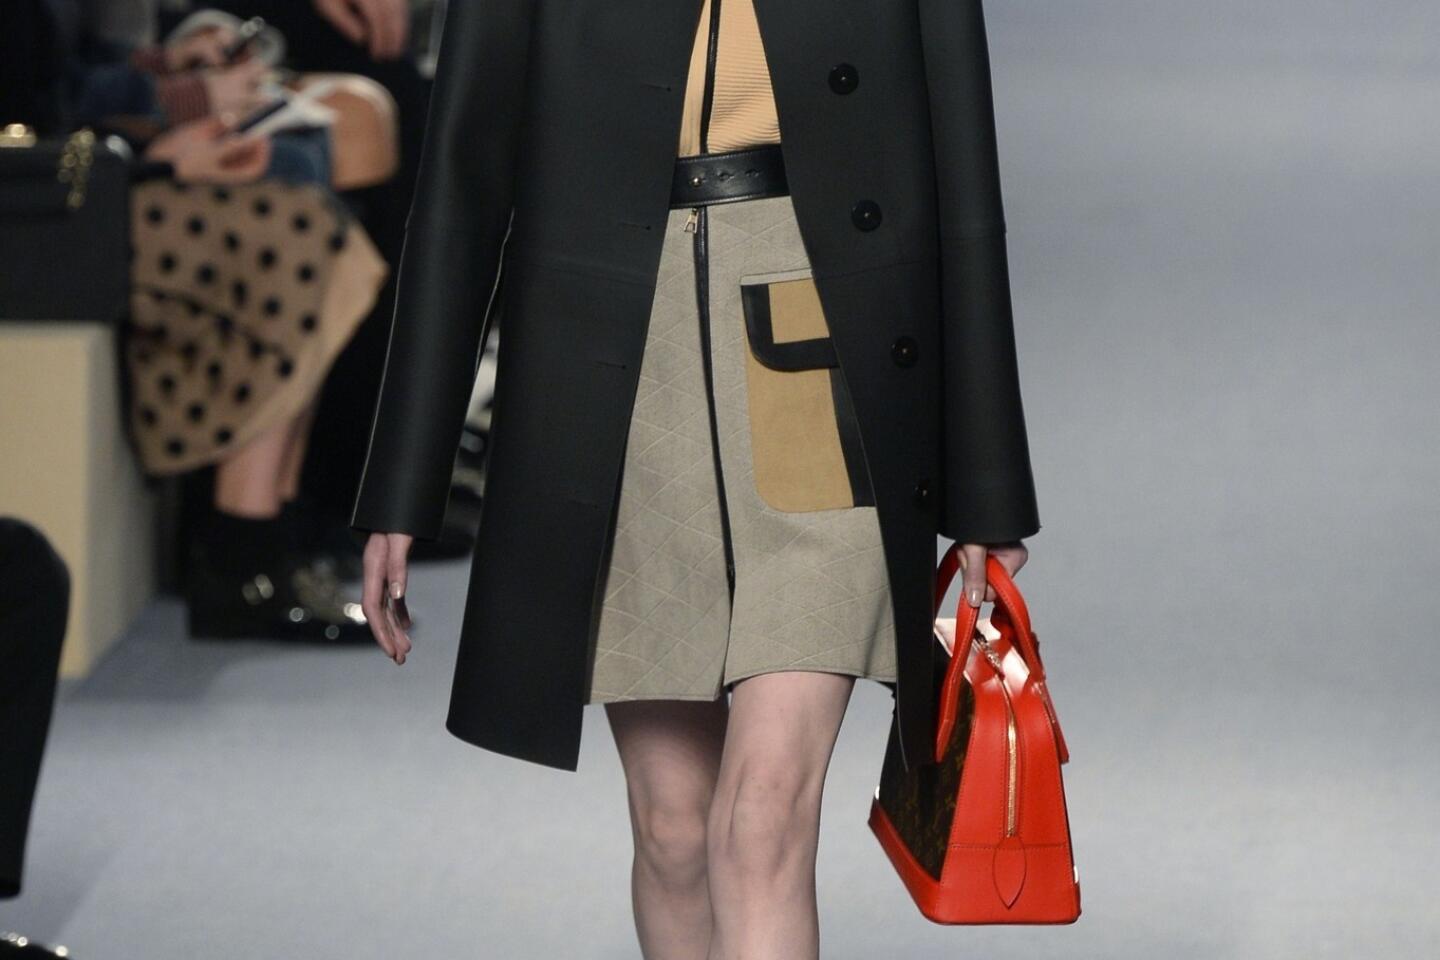 Louis Vuitton Cropped Cape-Sleeved Coat